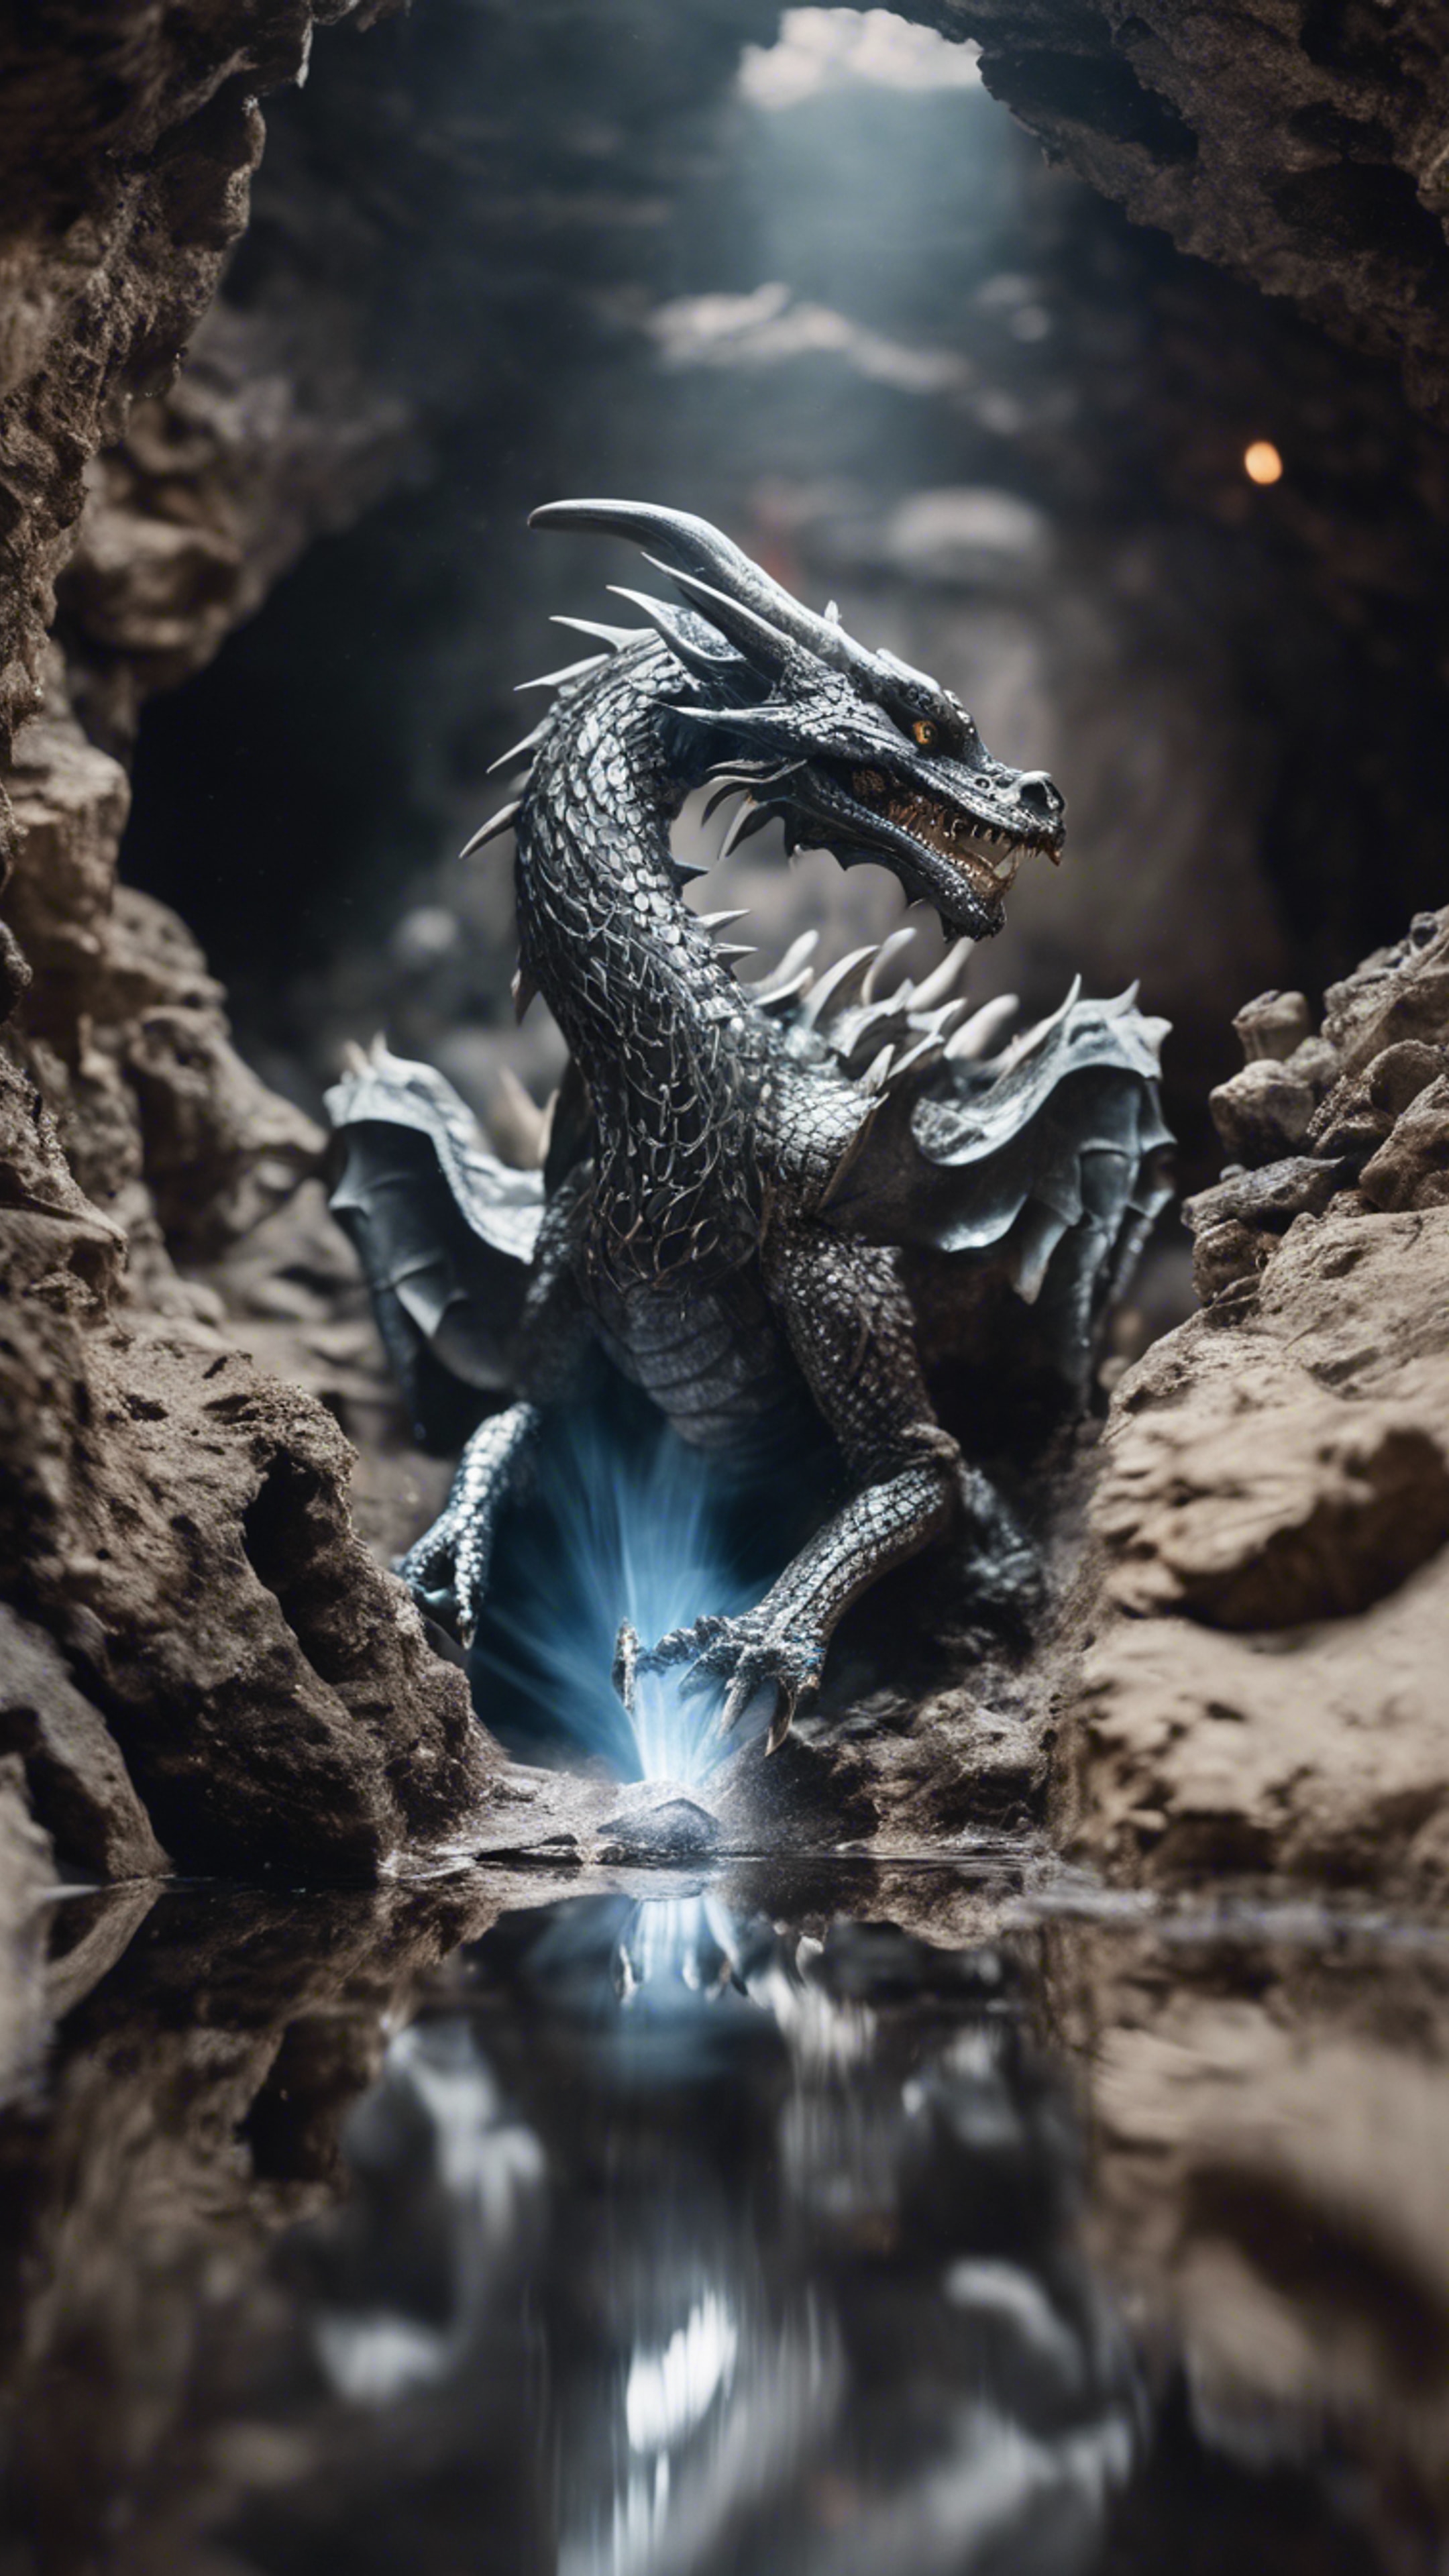 A cool dragon of pure quicksilver, fluid and reflective, darting through a forgotten mine shaft.